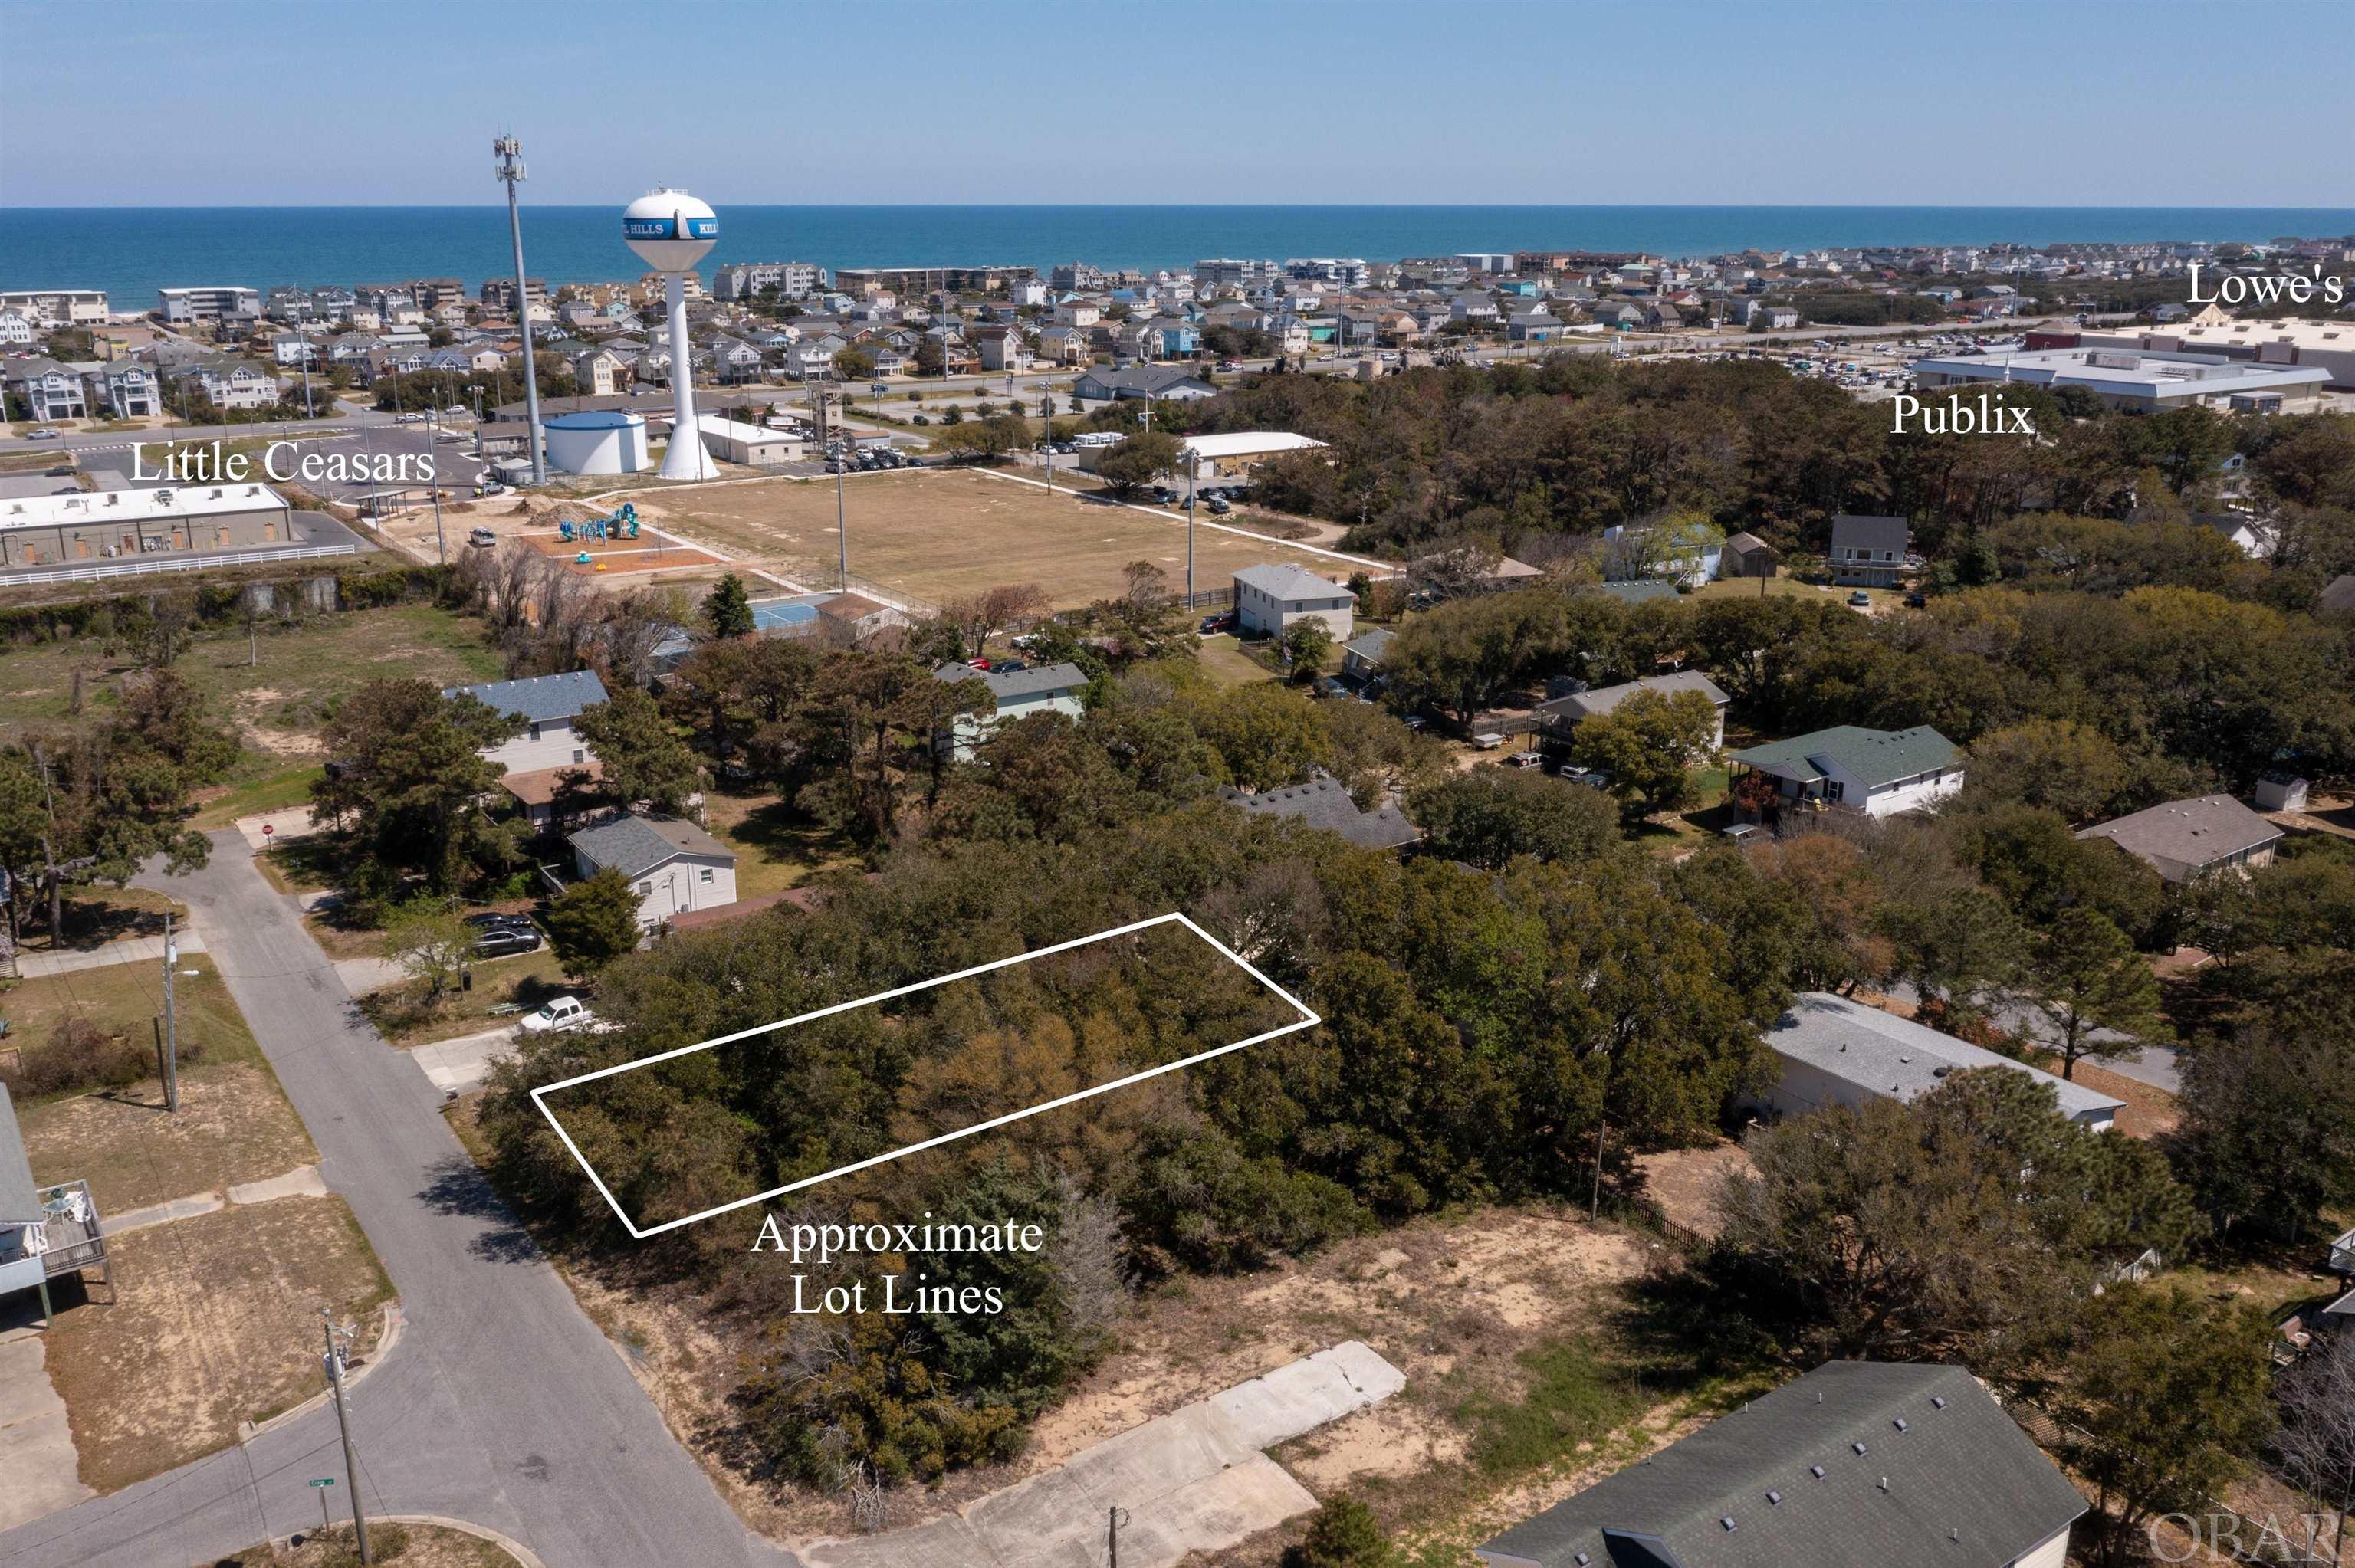 A Sweet Lot with high elevations located close to all of the amenities Kill Devil Hills is so well known for. This West Side lot offers opportunity with X Flood Zone and No Fill Required. With multiple Beach Access options directly across the Stop Light and the Sound Access at the end of Third that blends into the Bay Drive Multi Use path for miles of enjoyment along the sound. A winning combination. The Sound access for launching your boat is at Dock Street just quick bike or car ride away. Located in a private setting but also close to Publix, Food Lion, Lowes, and the upcoming Target, this is a no brainer. Call me today to discuss your options. Lot directly next door is also available for sale. Property taxes are estimated using 2021 tax rate and the asking price. Actual taxes will be determined upon separation of lots by the county.